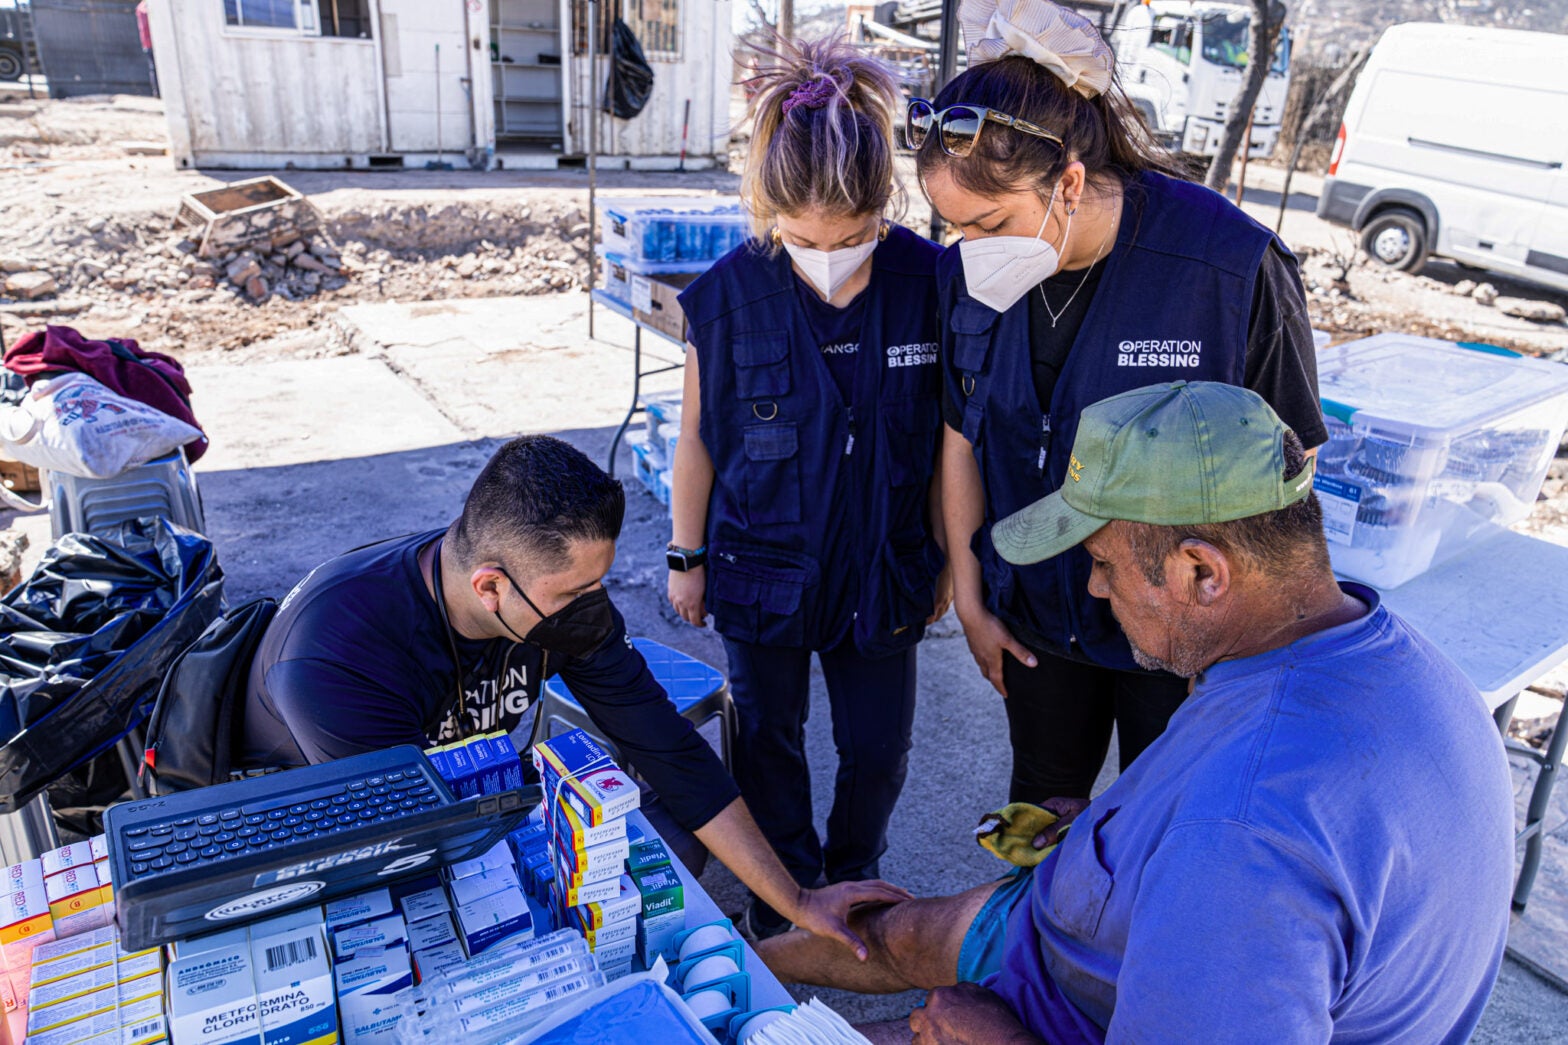 Chile wildfire medical relief